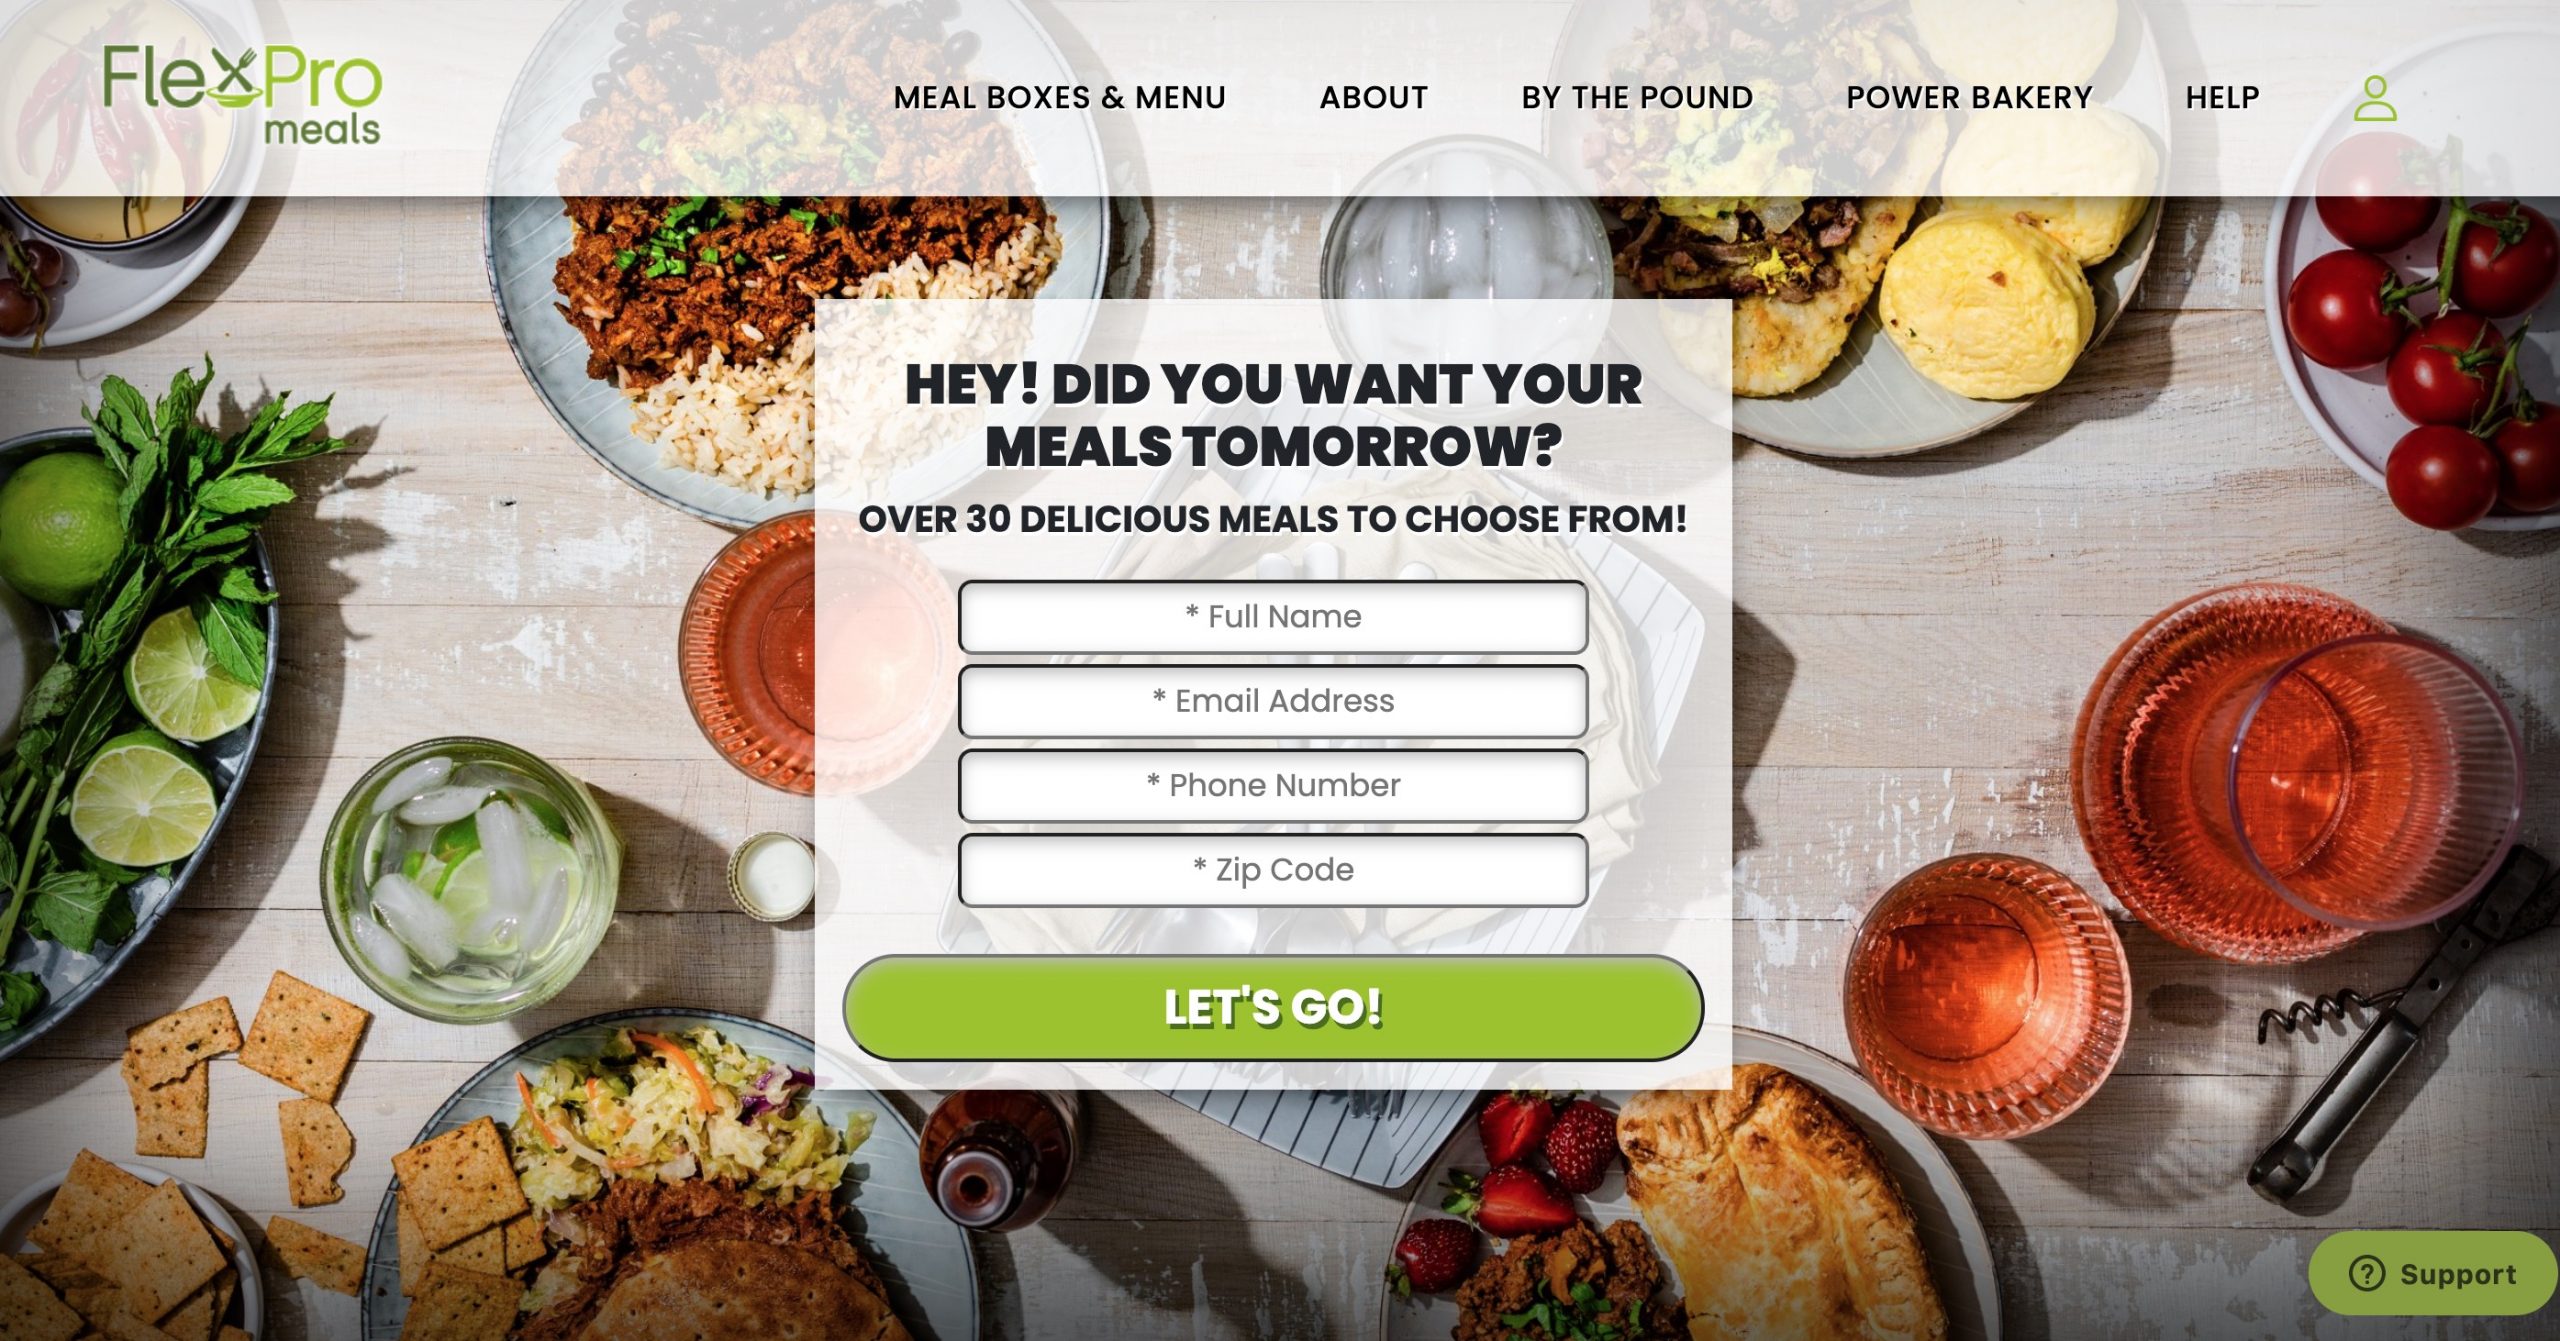 flexpro meals main page